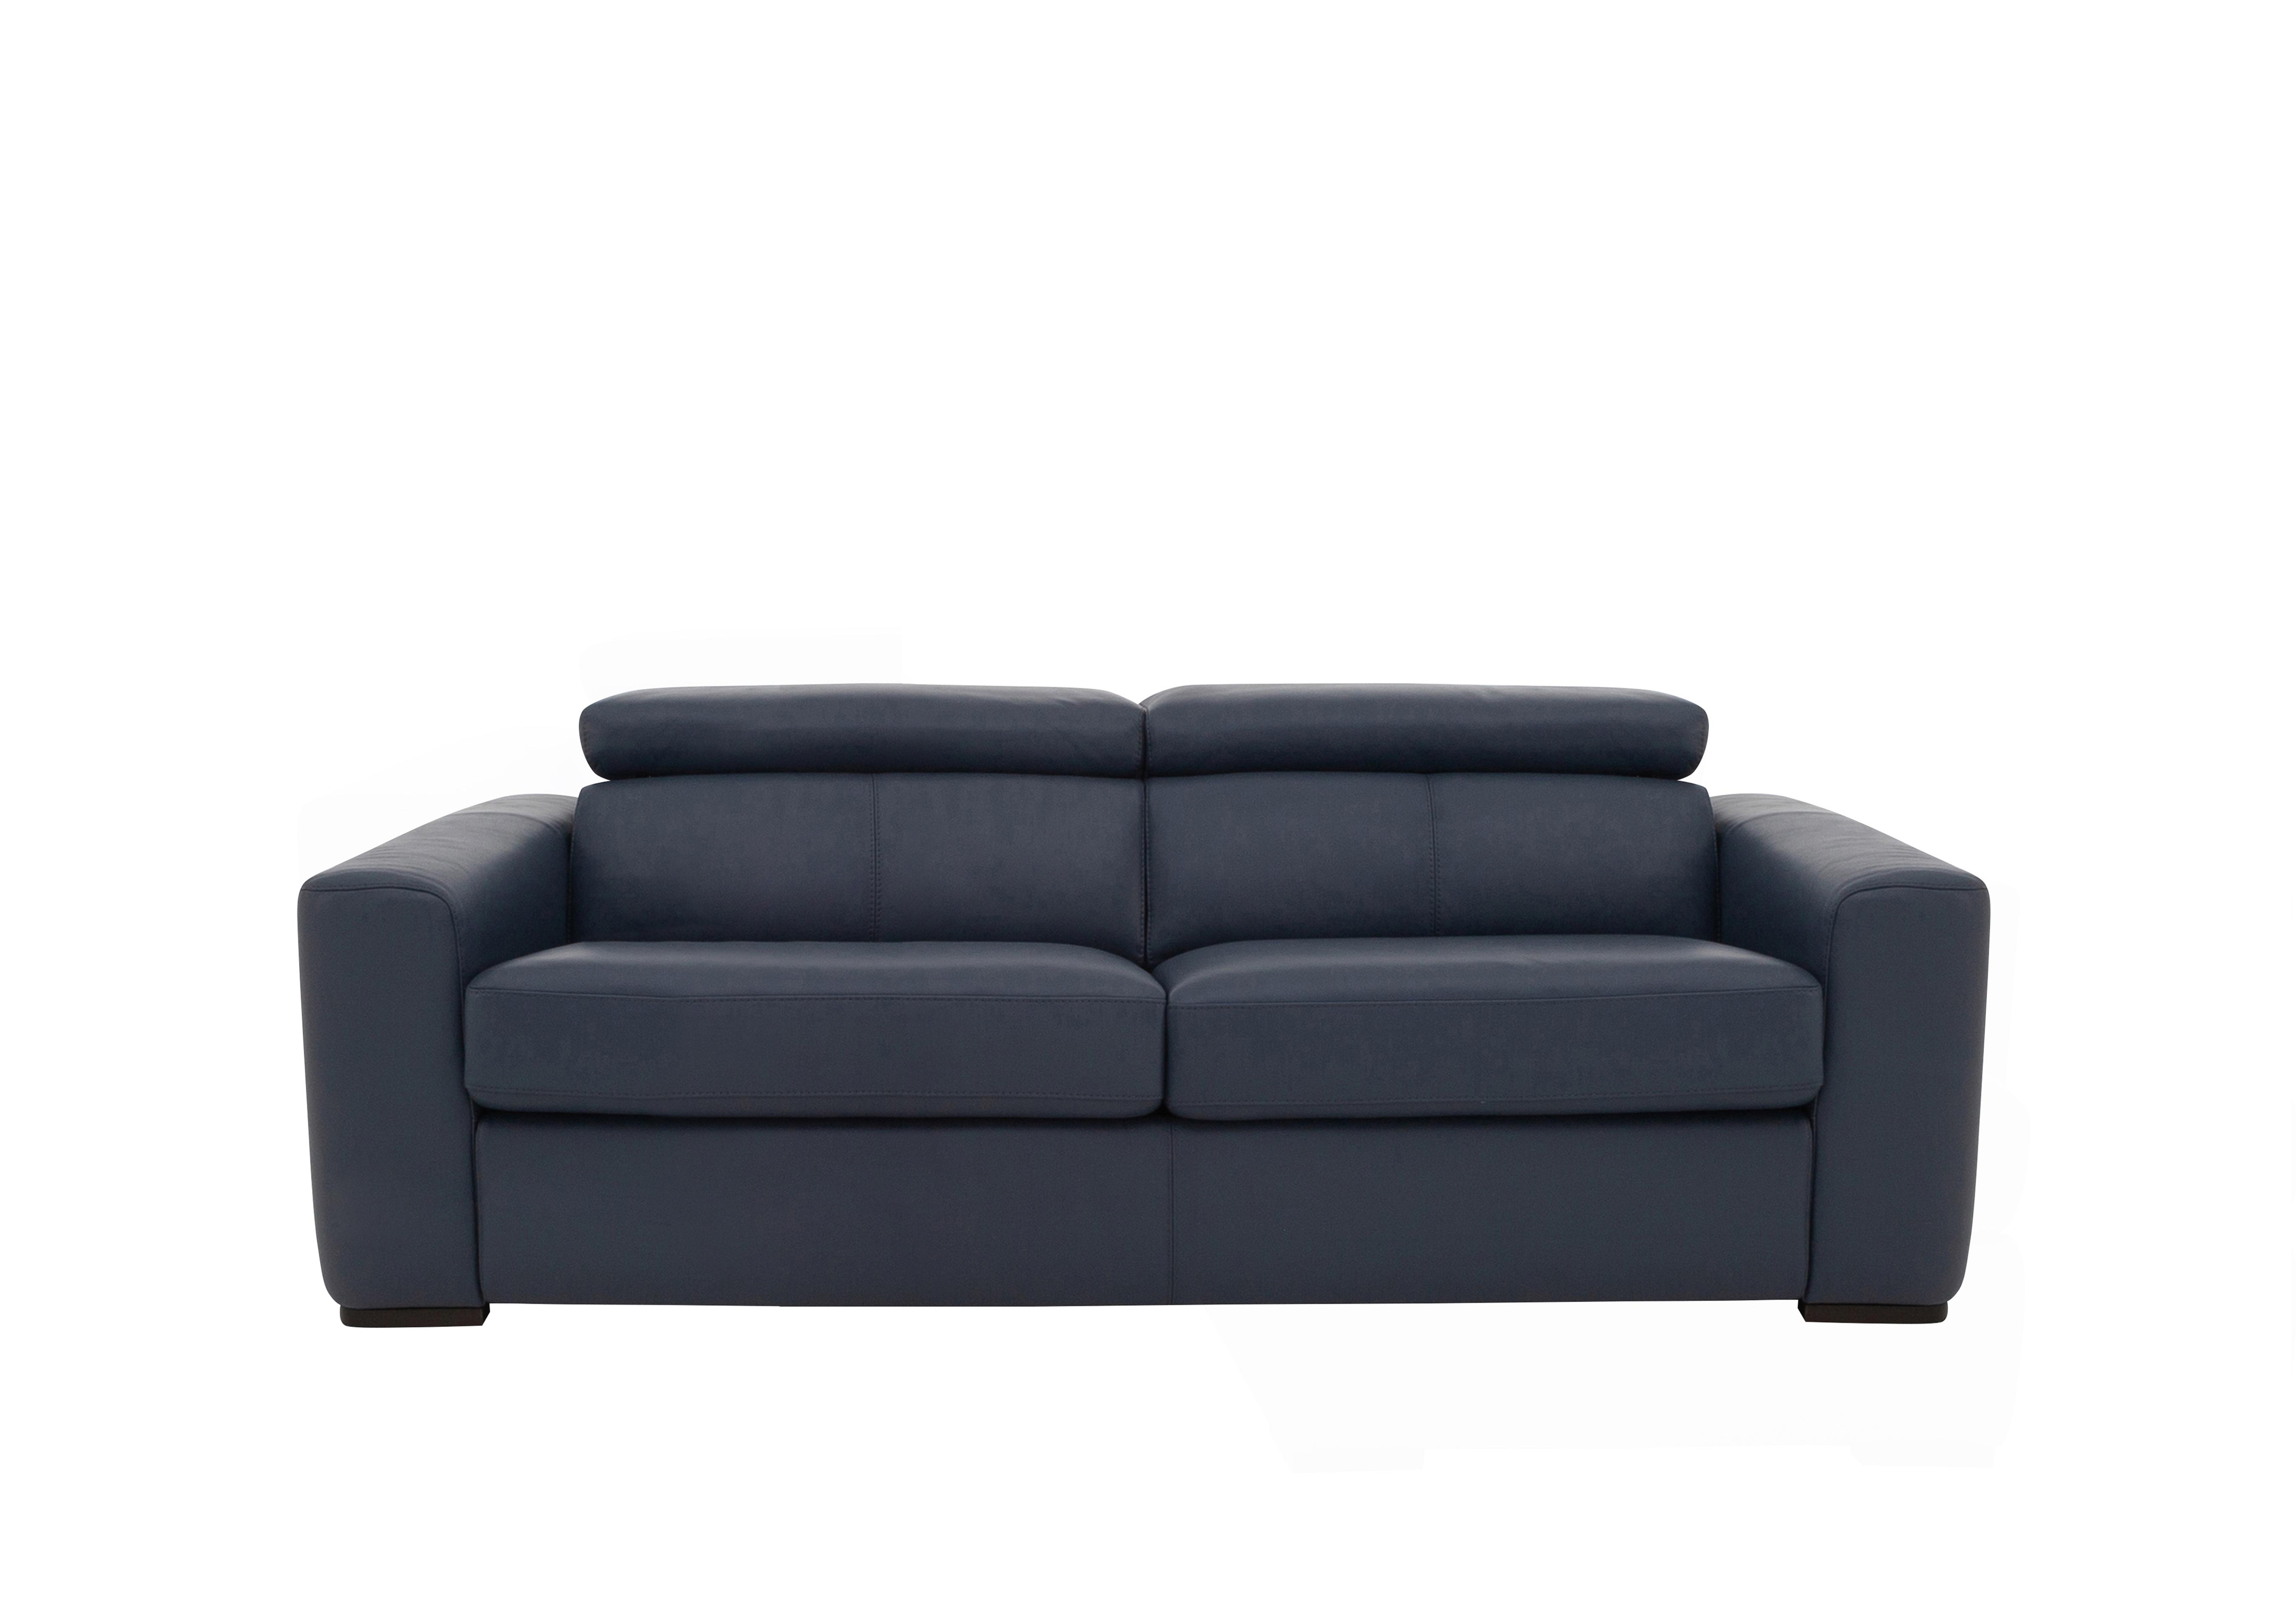 Infinity 3 Seater Leather Sofa in Nc-313e Ocean Blue on Furniture Village